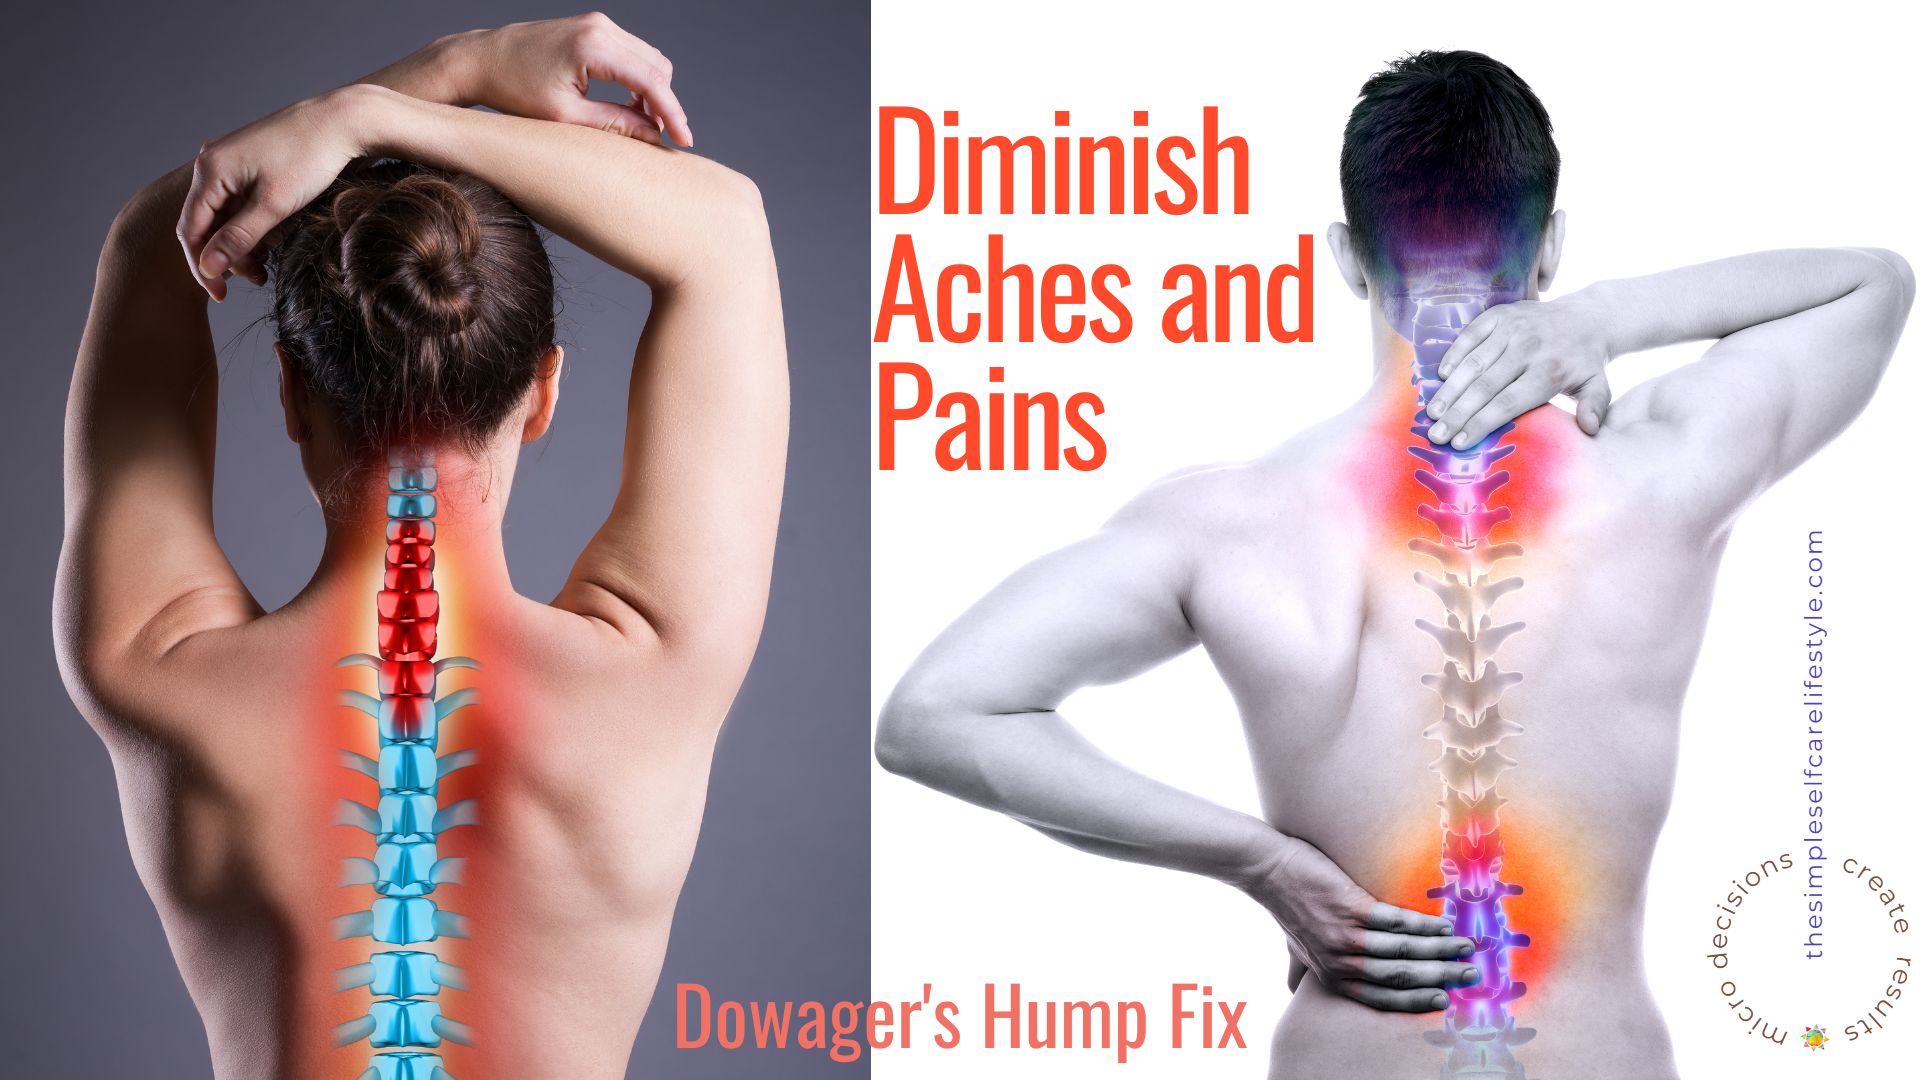 Dowagers Hump can cause aches and pains all up and down the spine